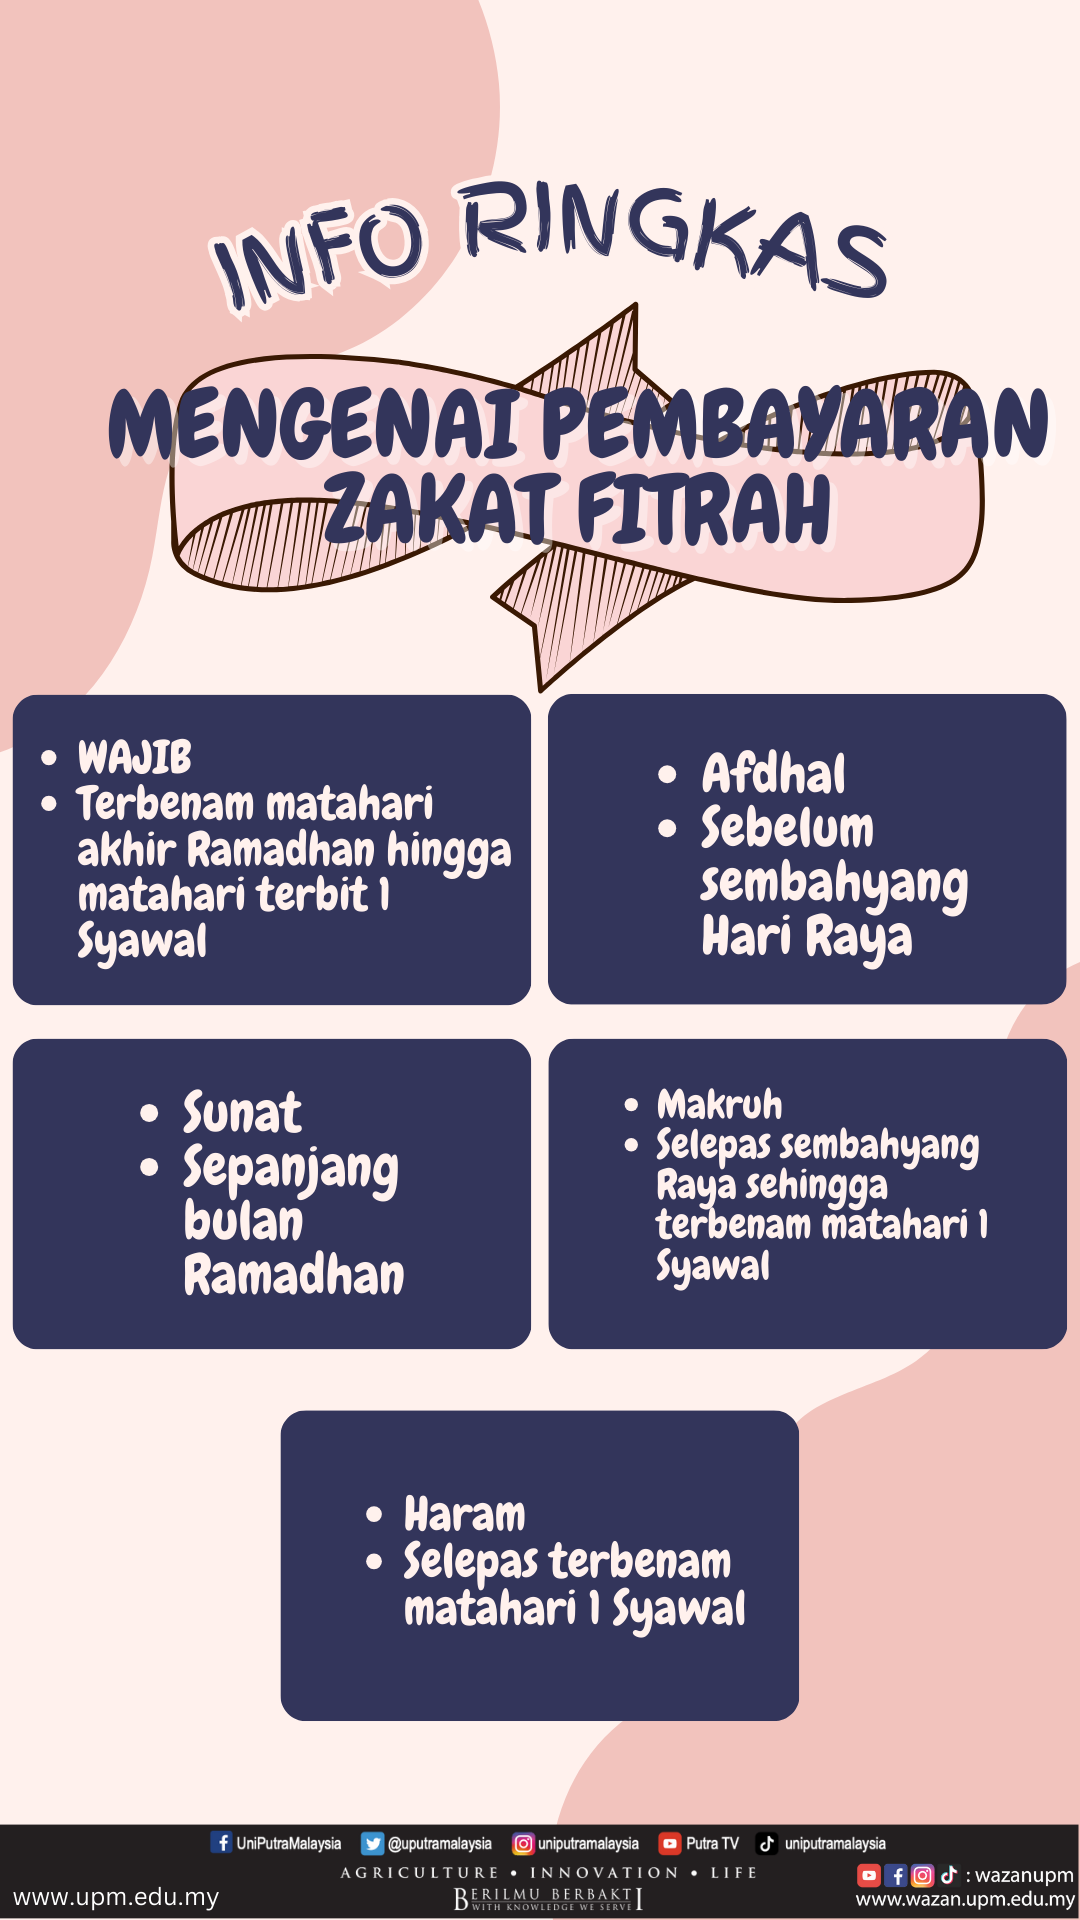 When someone forgets to pay zakat al-fitr, what actions need to be taken and how can it be resolved?